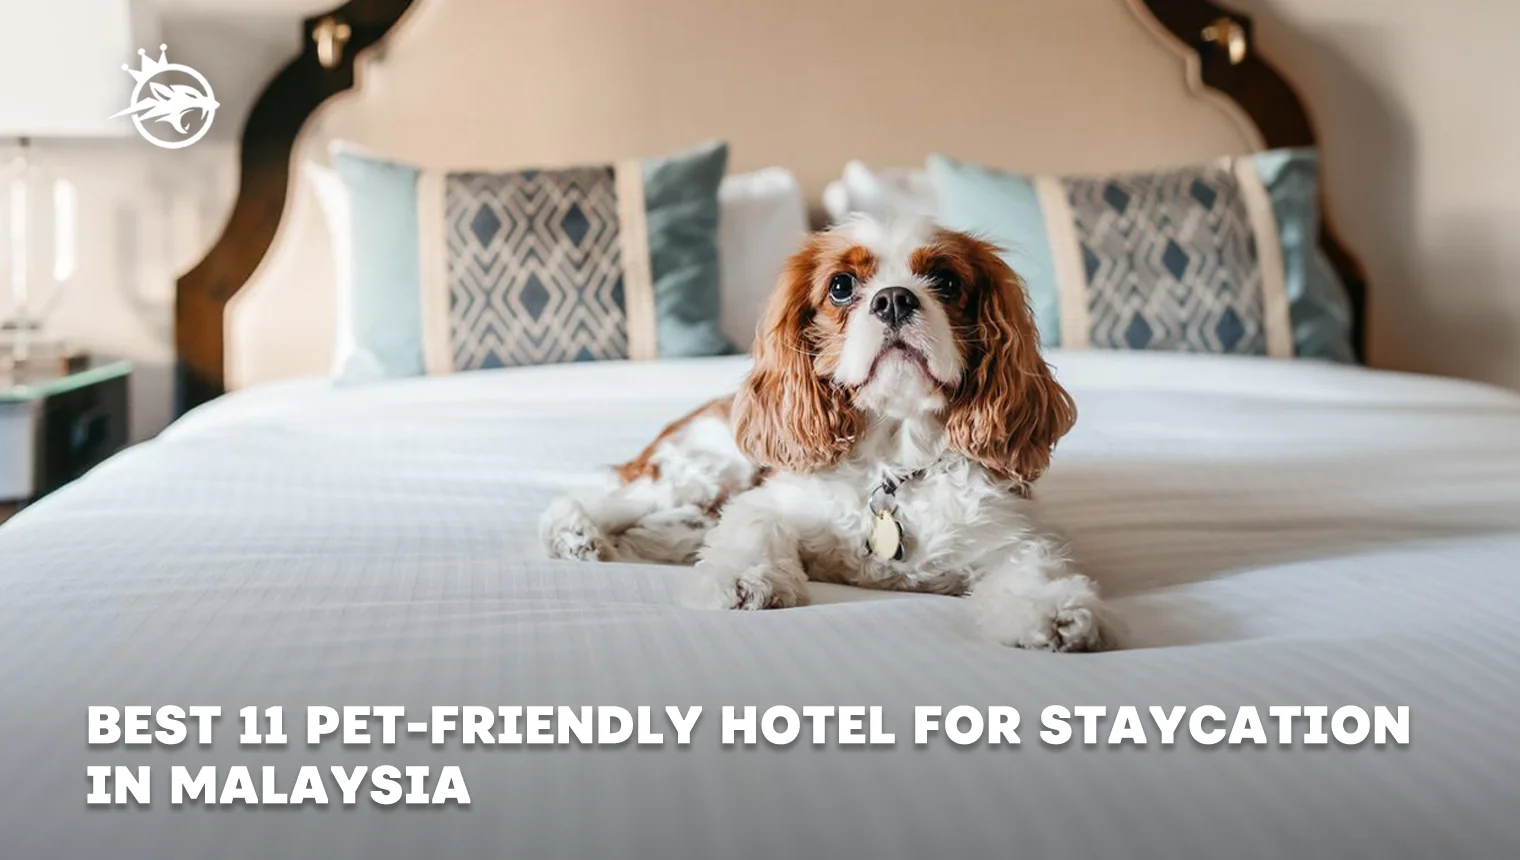 Best 11 Pet-Friendly Hotel for Staycation in Malaysia